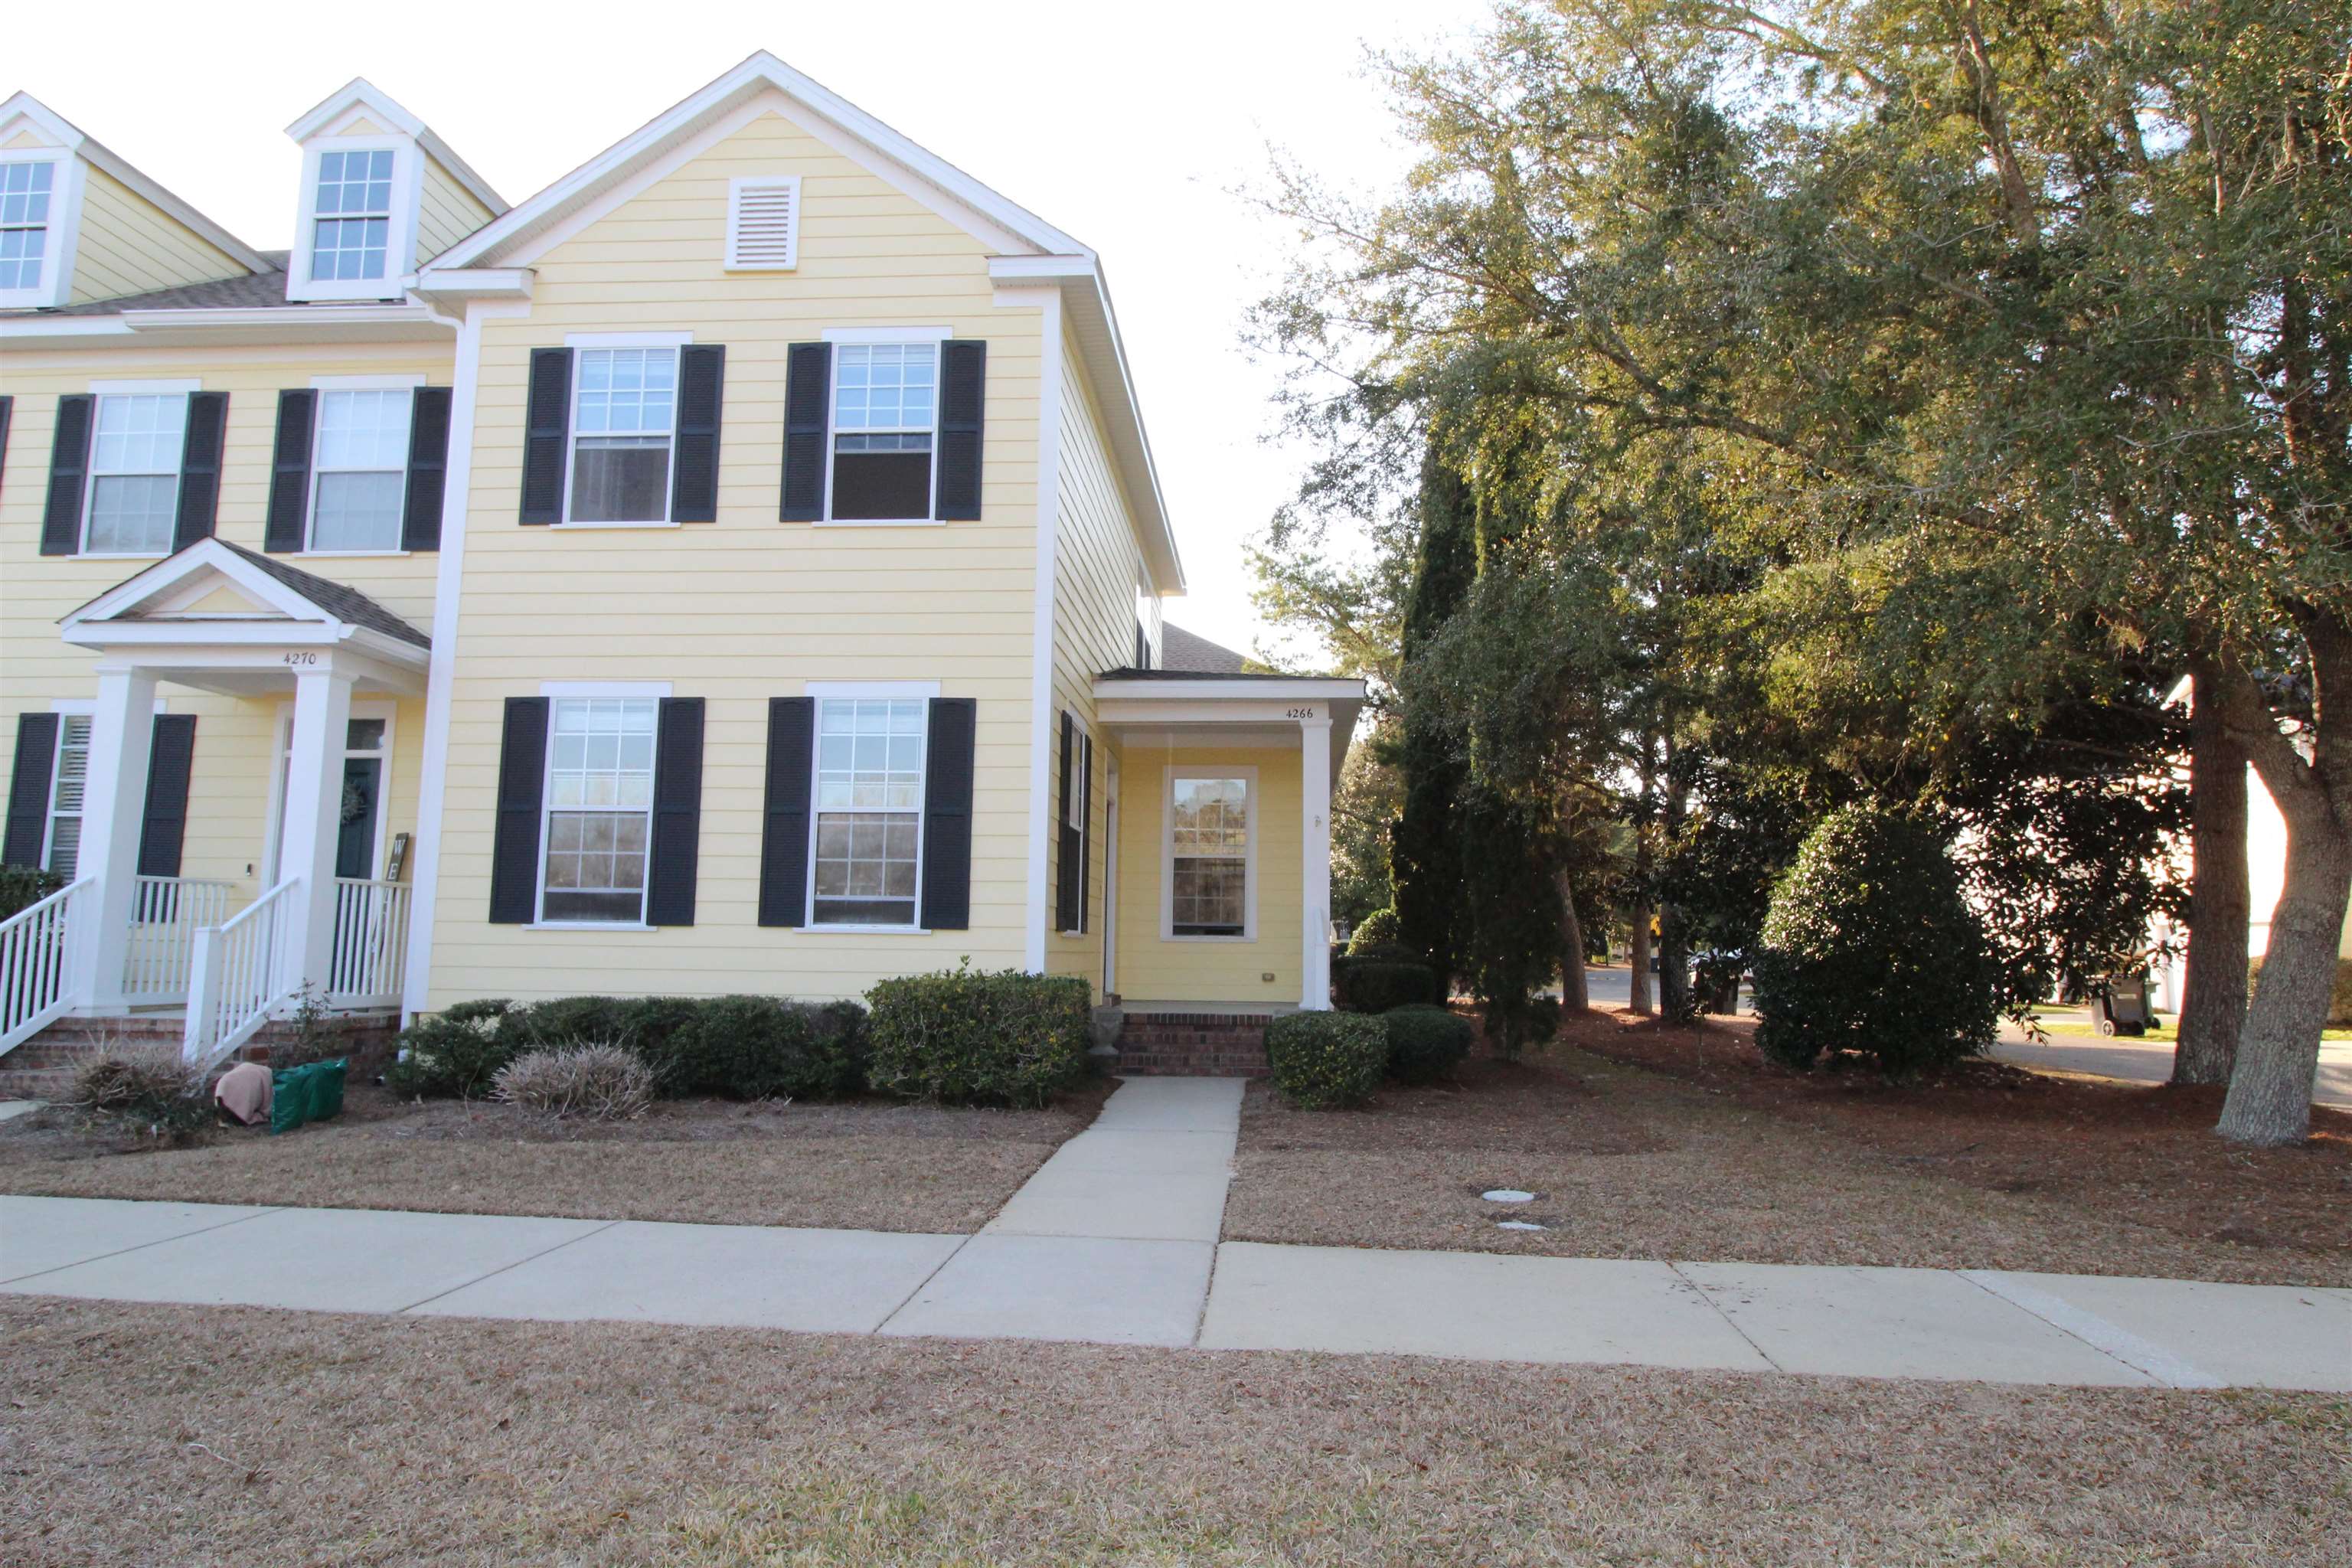 3/2.5 end unit townhome with a separate carriage house, sits on a corner lot. Within walking distance to neighborhood schools. Master is located downstairs. 2 car garage. Carriage house with separate entrance includes a kitchen and full bath. Great for rentals, home office or guest space.